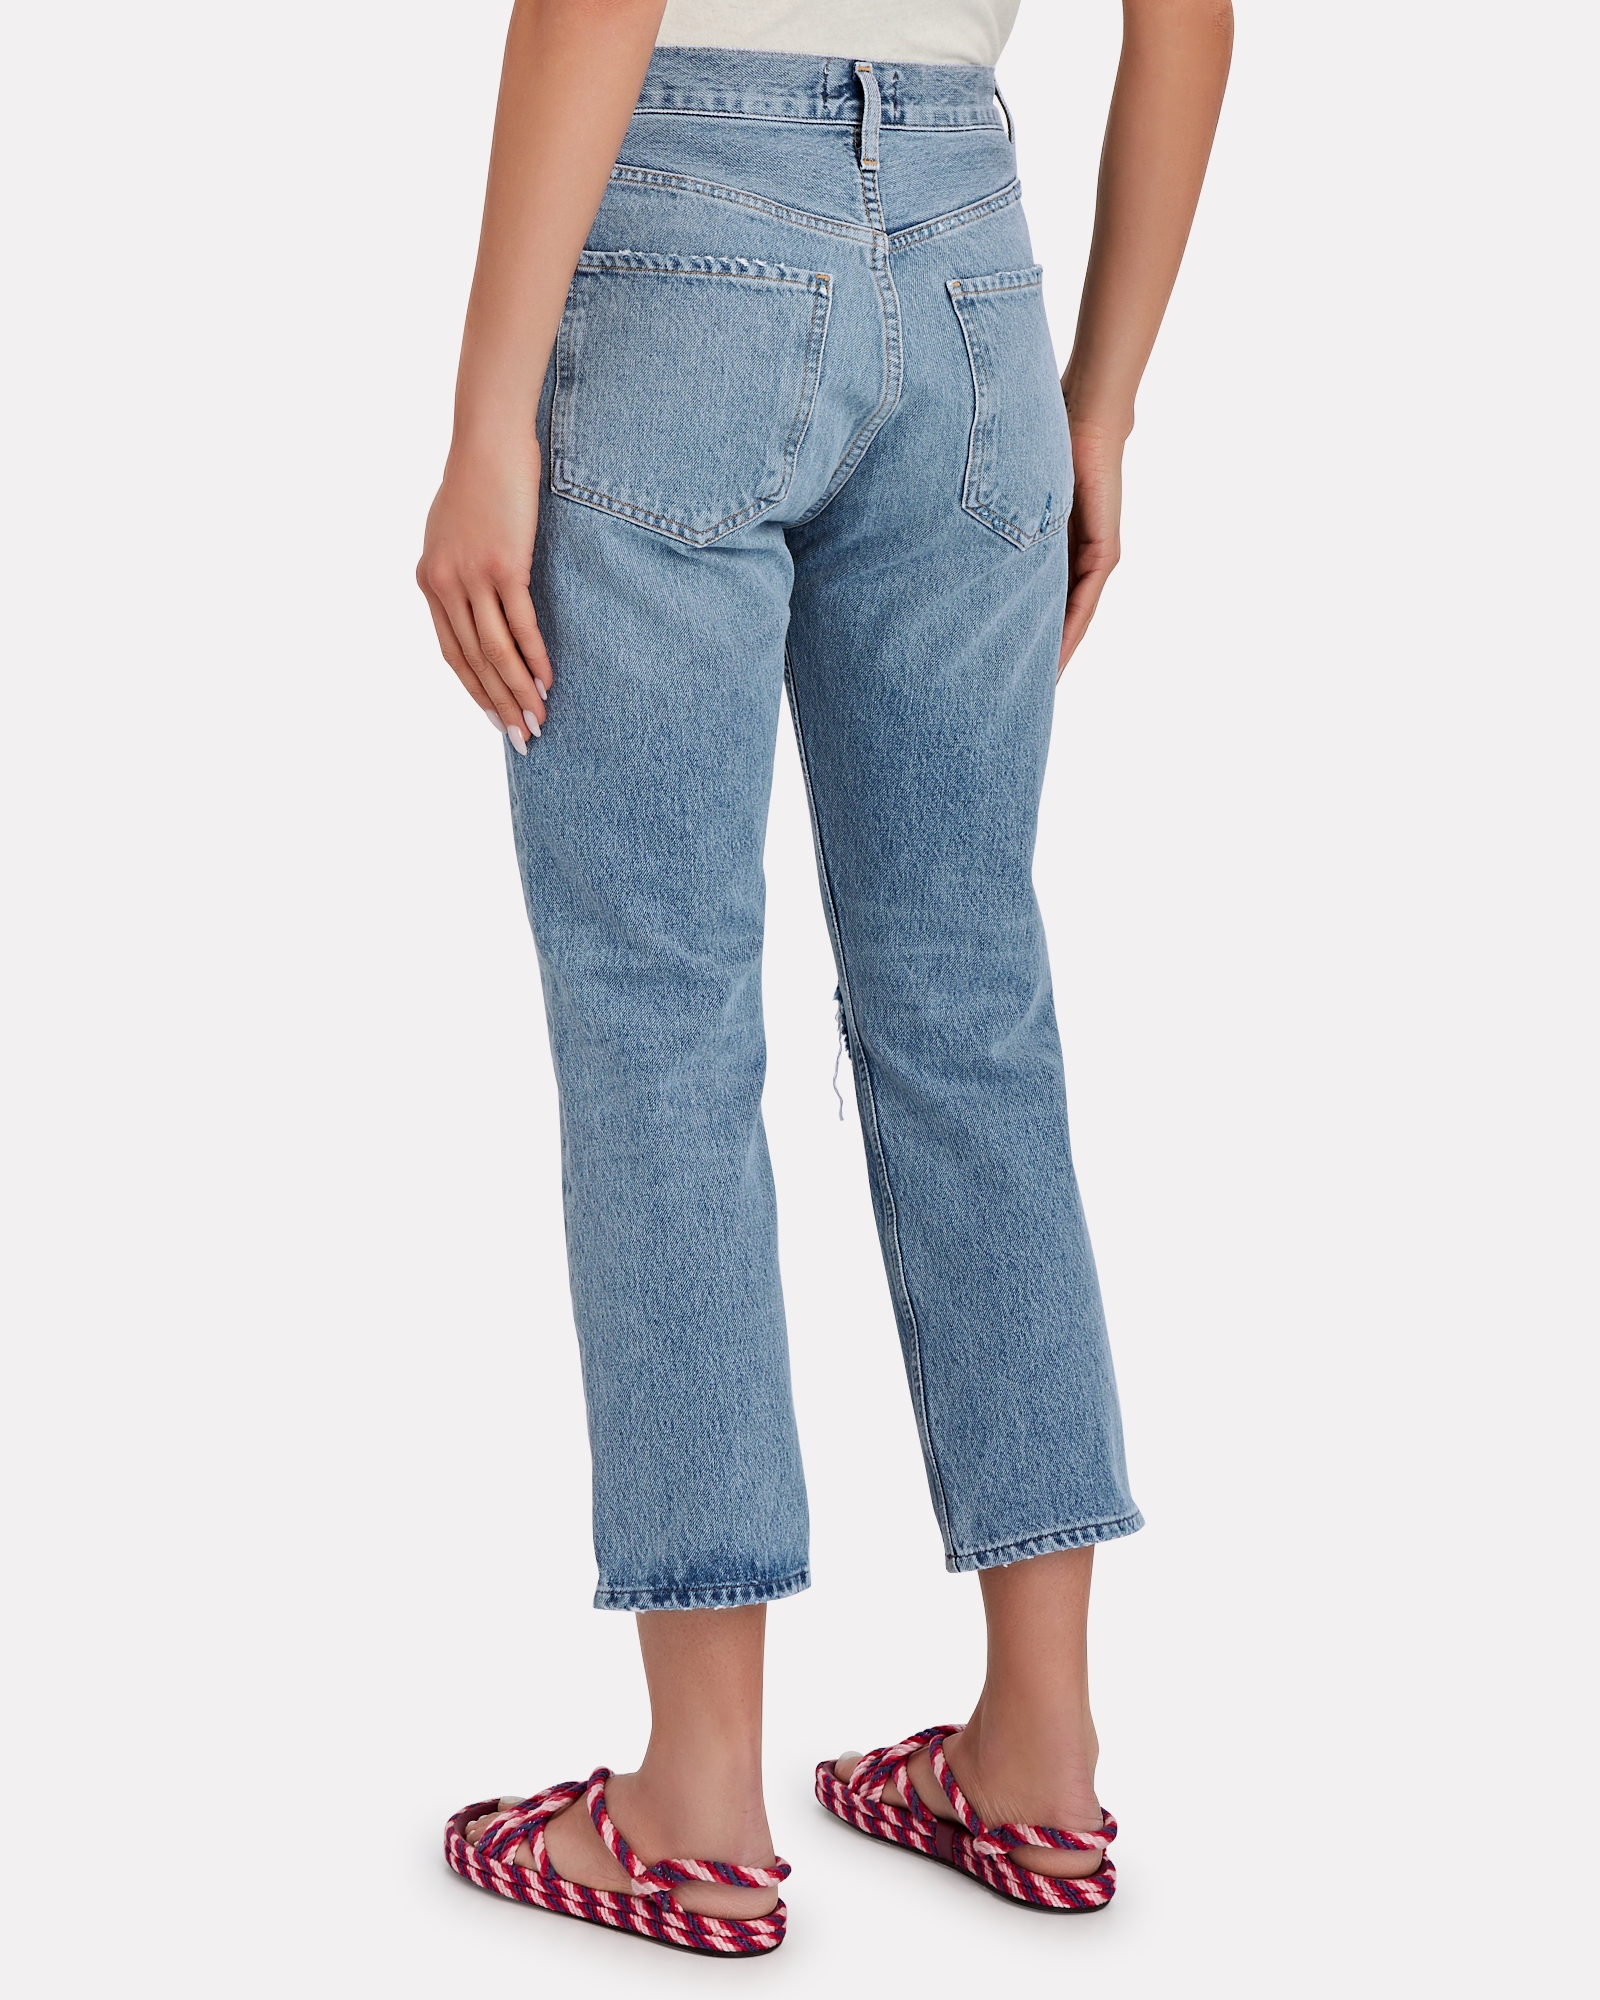 AGOLDE Riley High-Rise Cropped Jeans | INTERMIX®